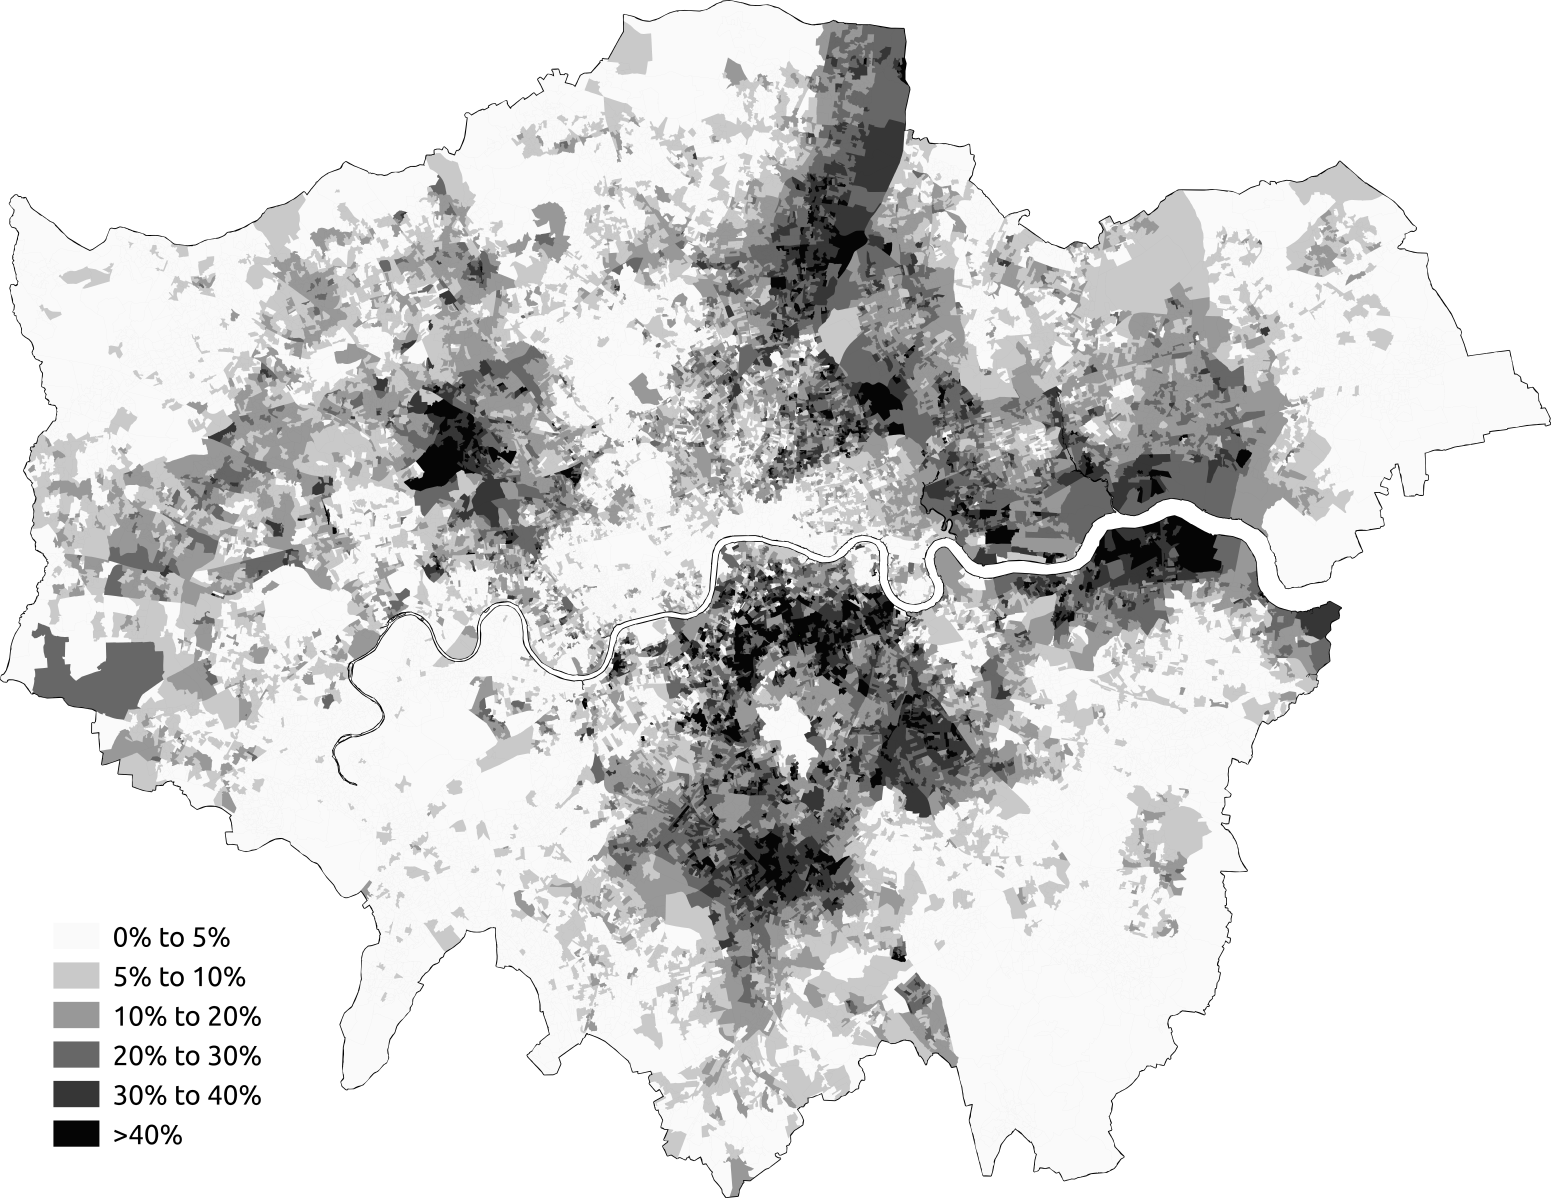 1551px-Black_Greater_London_2011_census.png